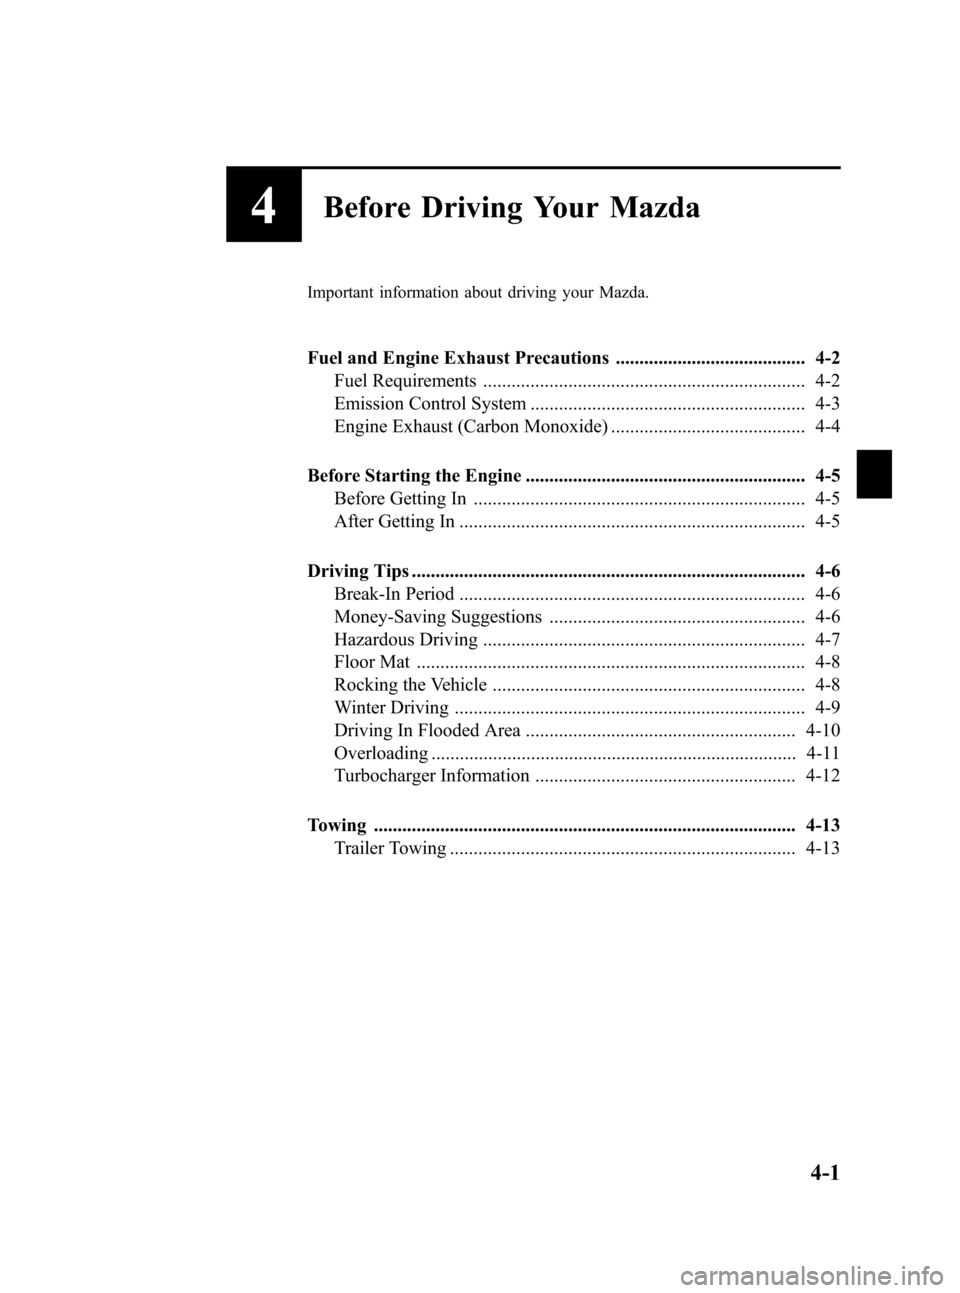 MAZDA MODEL CX-7 2009  Owners Manual (in English) Black plate (139,1)
4Before Driving Your Mazda
Important information about driving your Mazda.
Fuel and Engine Exhaust Precautions ........................................ 4-2
Fuel Requirements ......